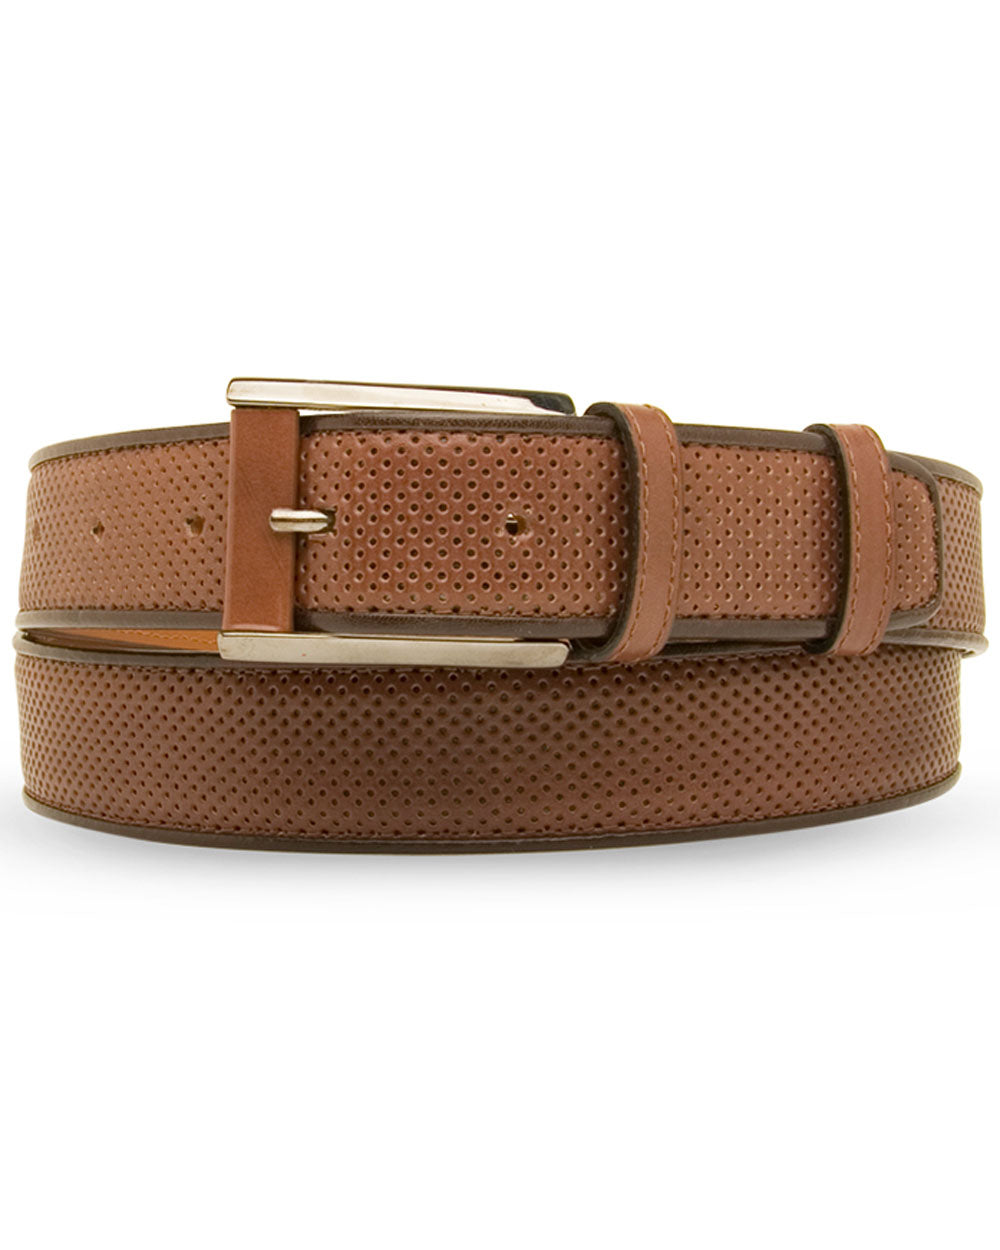 Calf Leather Belt in Taupe Brown